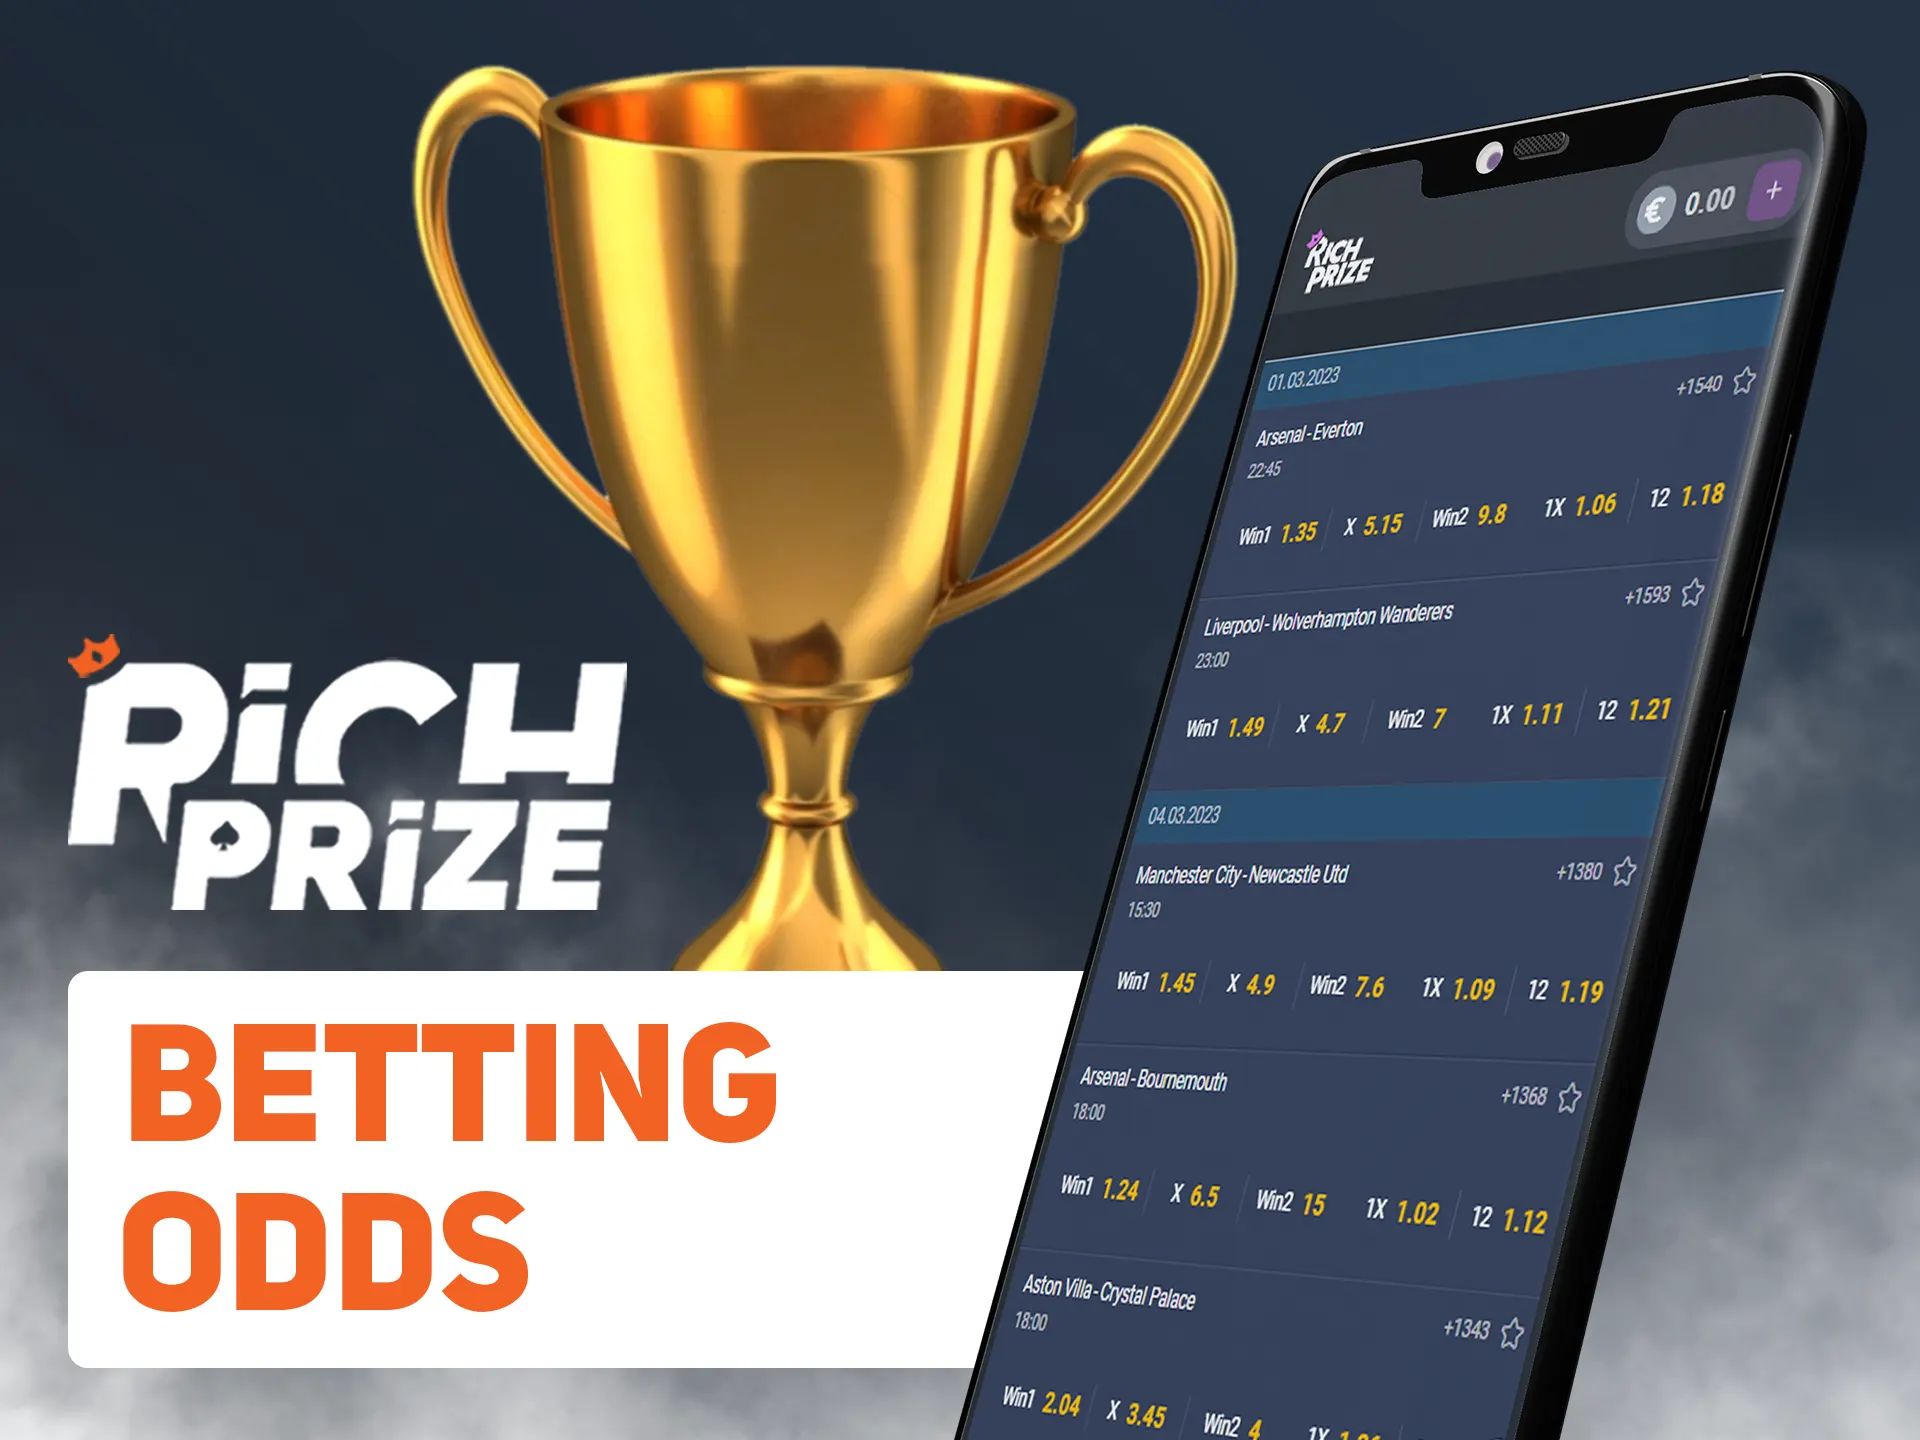 Calculate your odds and make bet at Richprize.